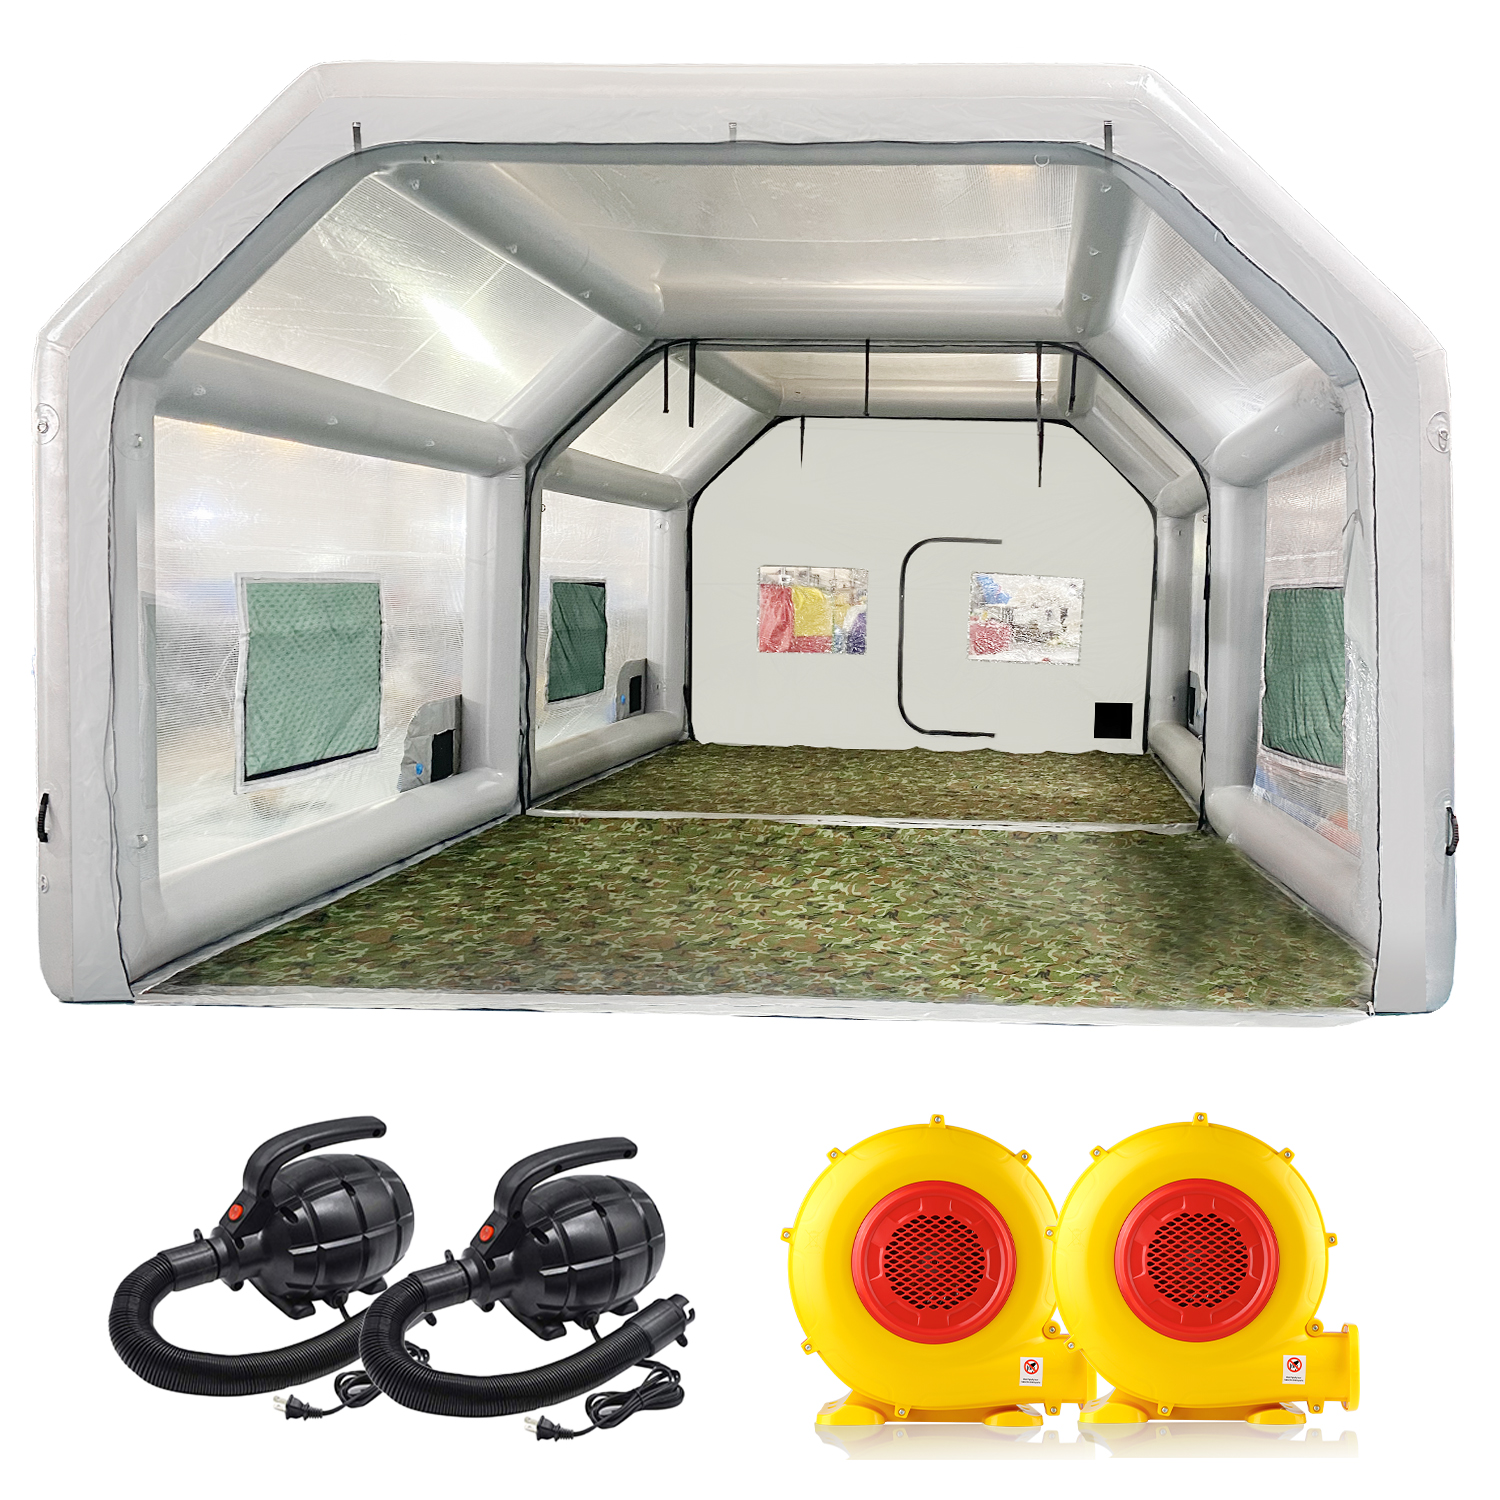 Sewinfla Professional Inflatable Paint Booth 13x8.2x8.2Ft with 2 Blowe